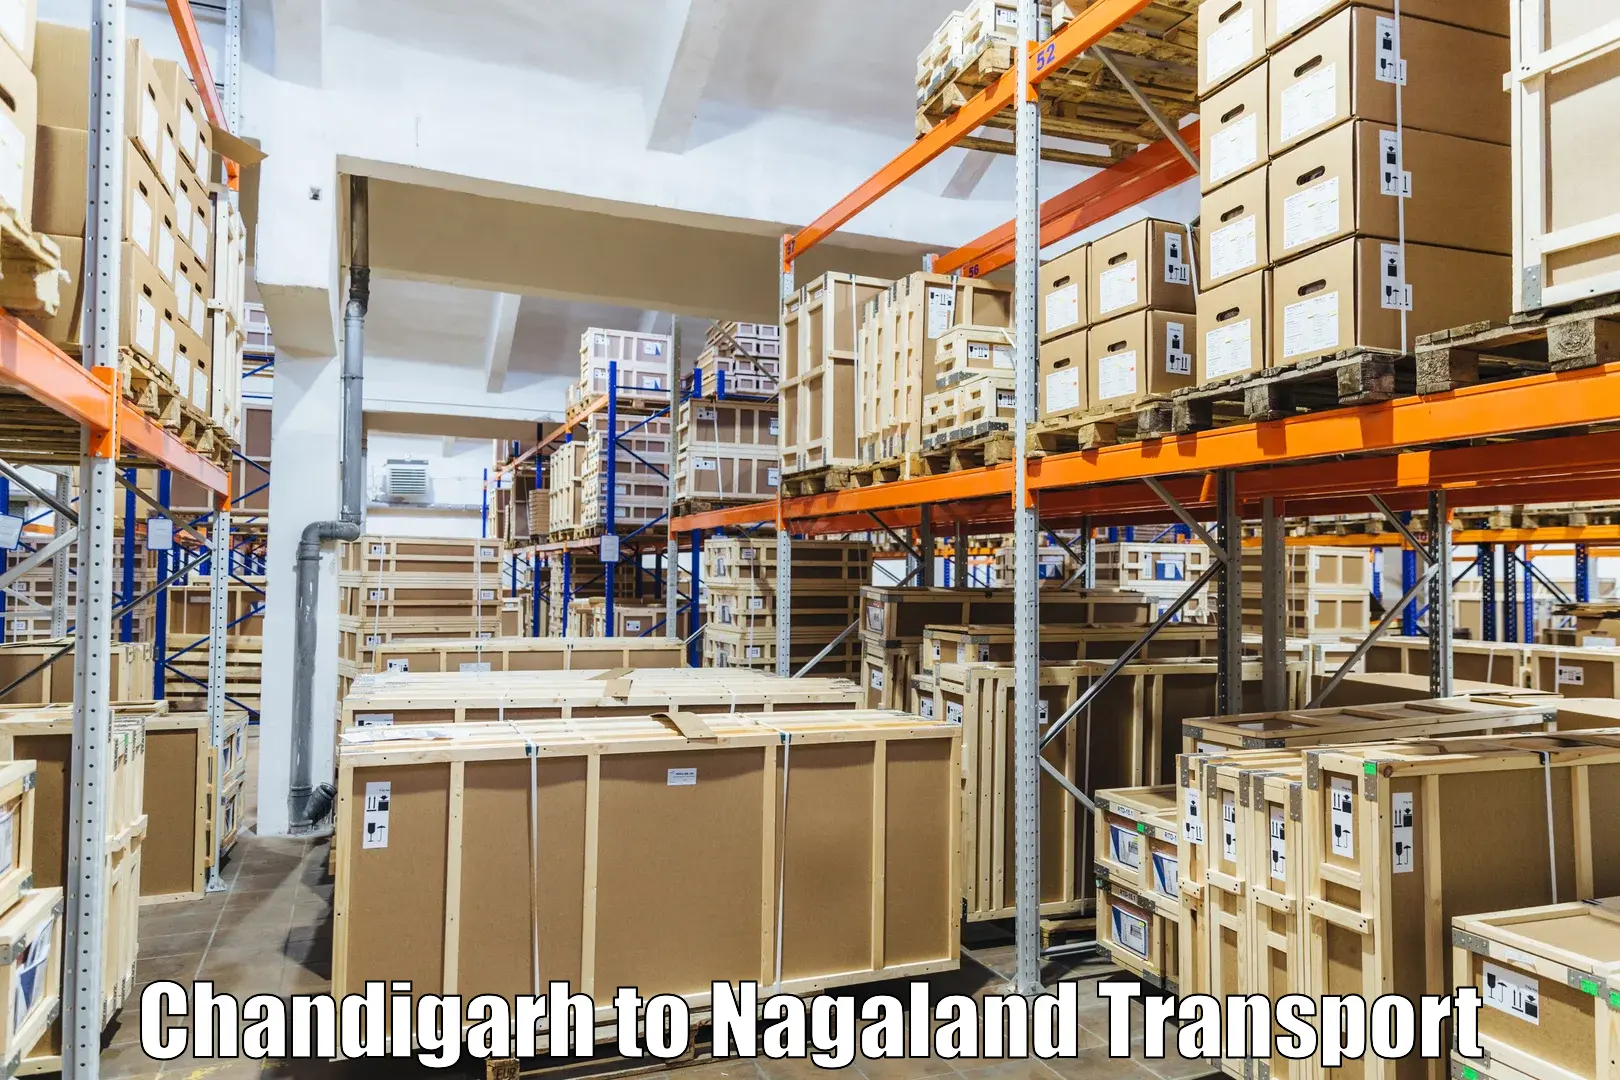 Vehicle transport services Chandigarh to Nagaland